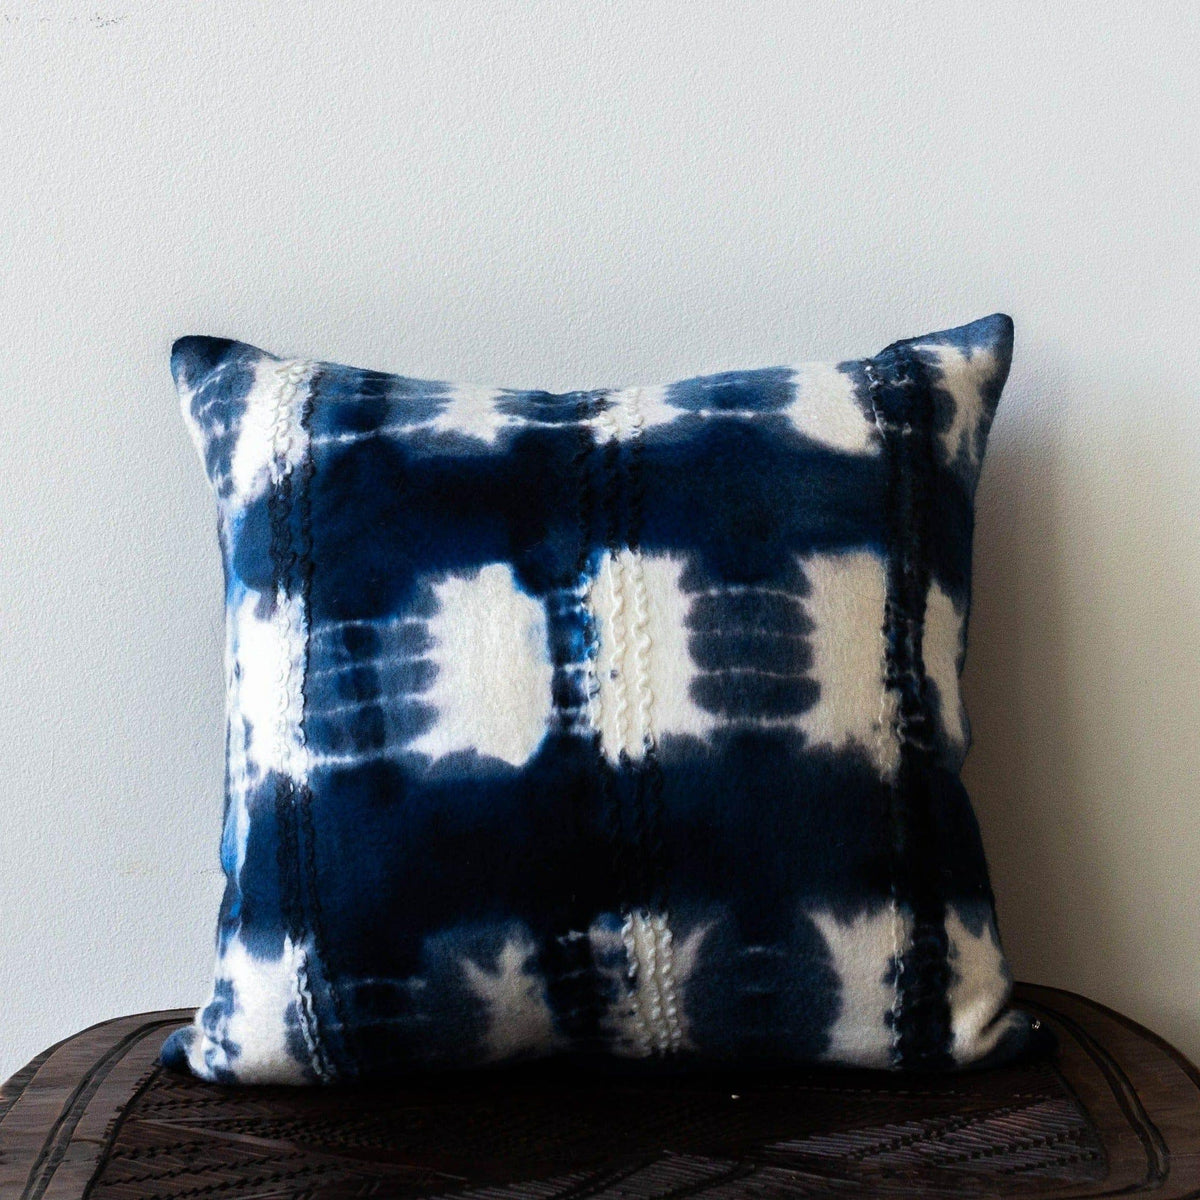 Adire Pillow kanju interiors african decor blue white indigo royal tie dye hand made felt hand felted Merino wool natural organic color accent pillow cushion throw decor lounge comfortable soft unique accent 